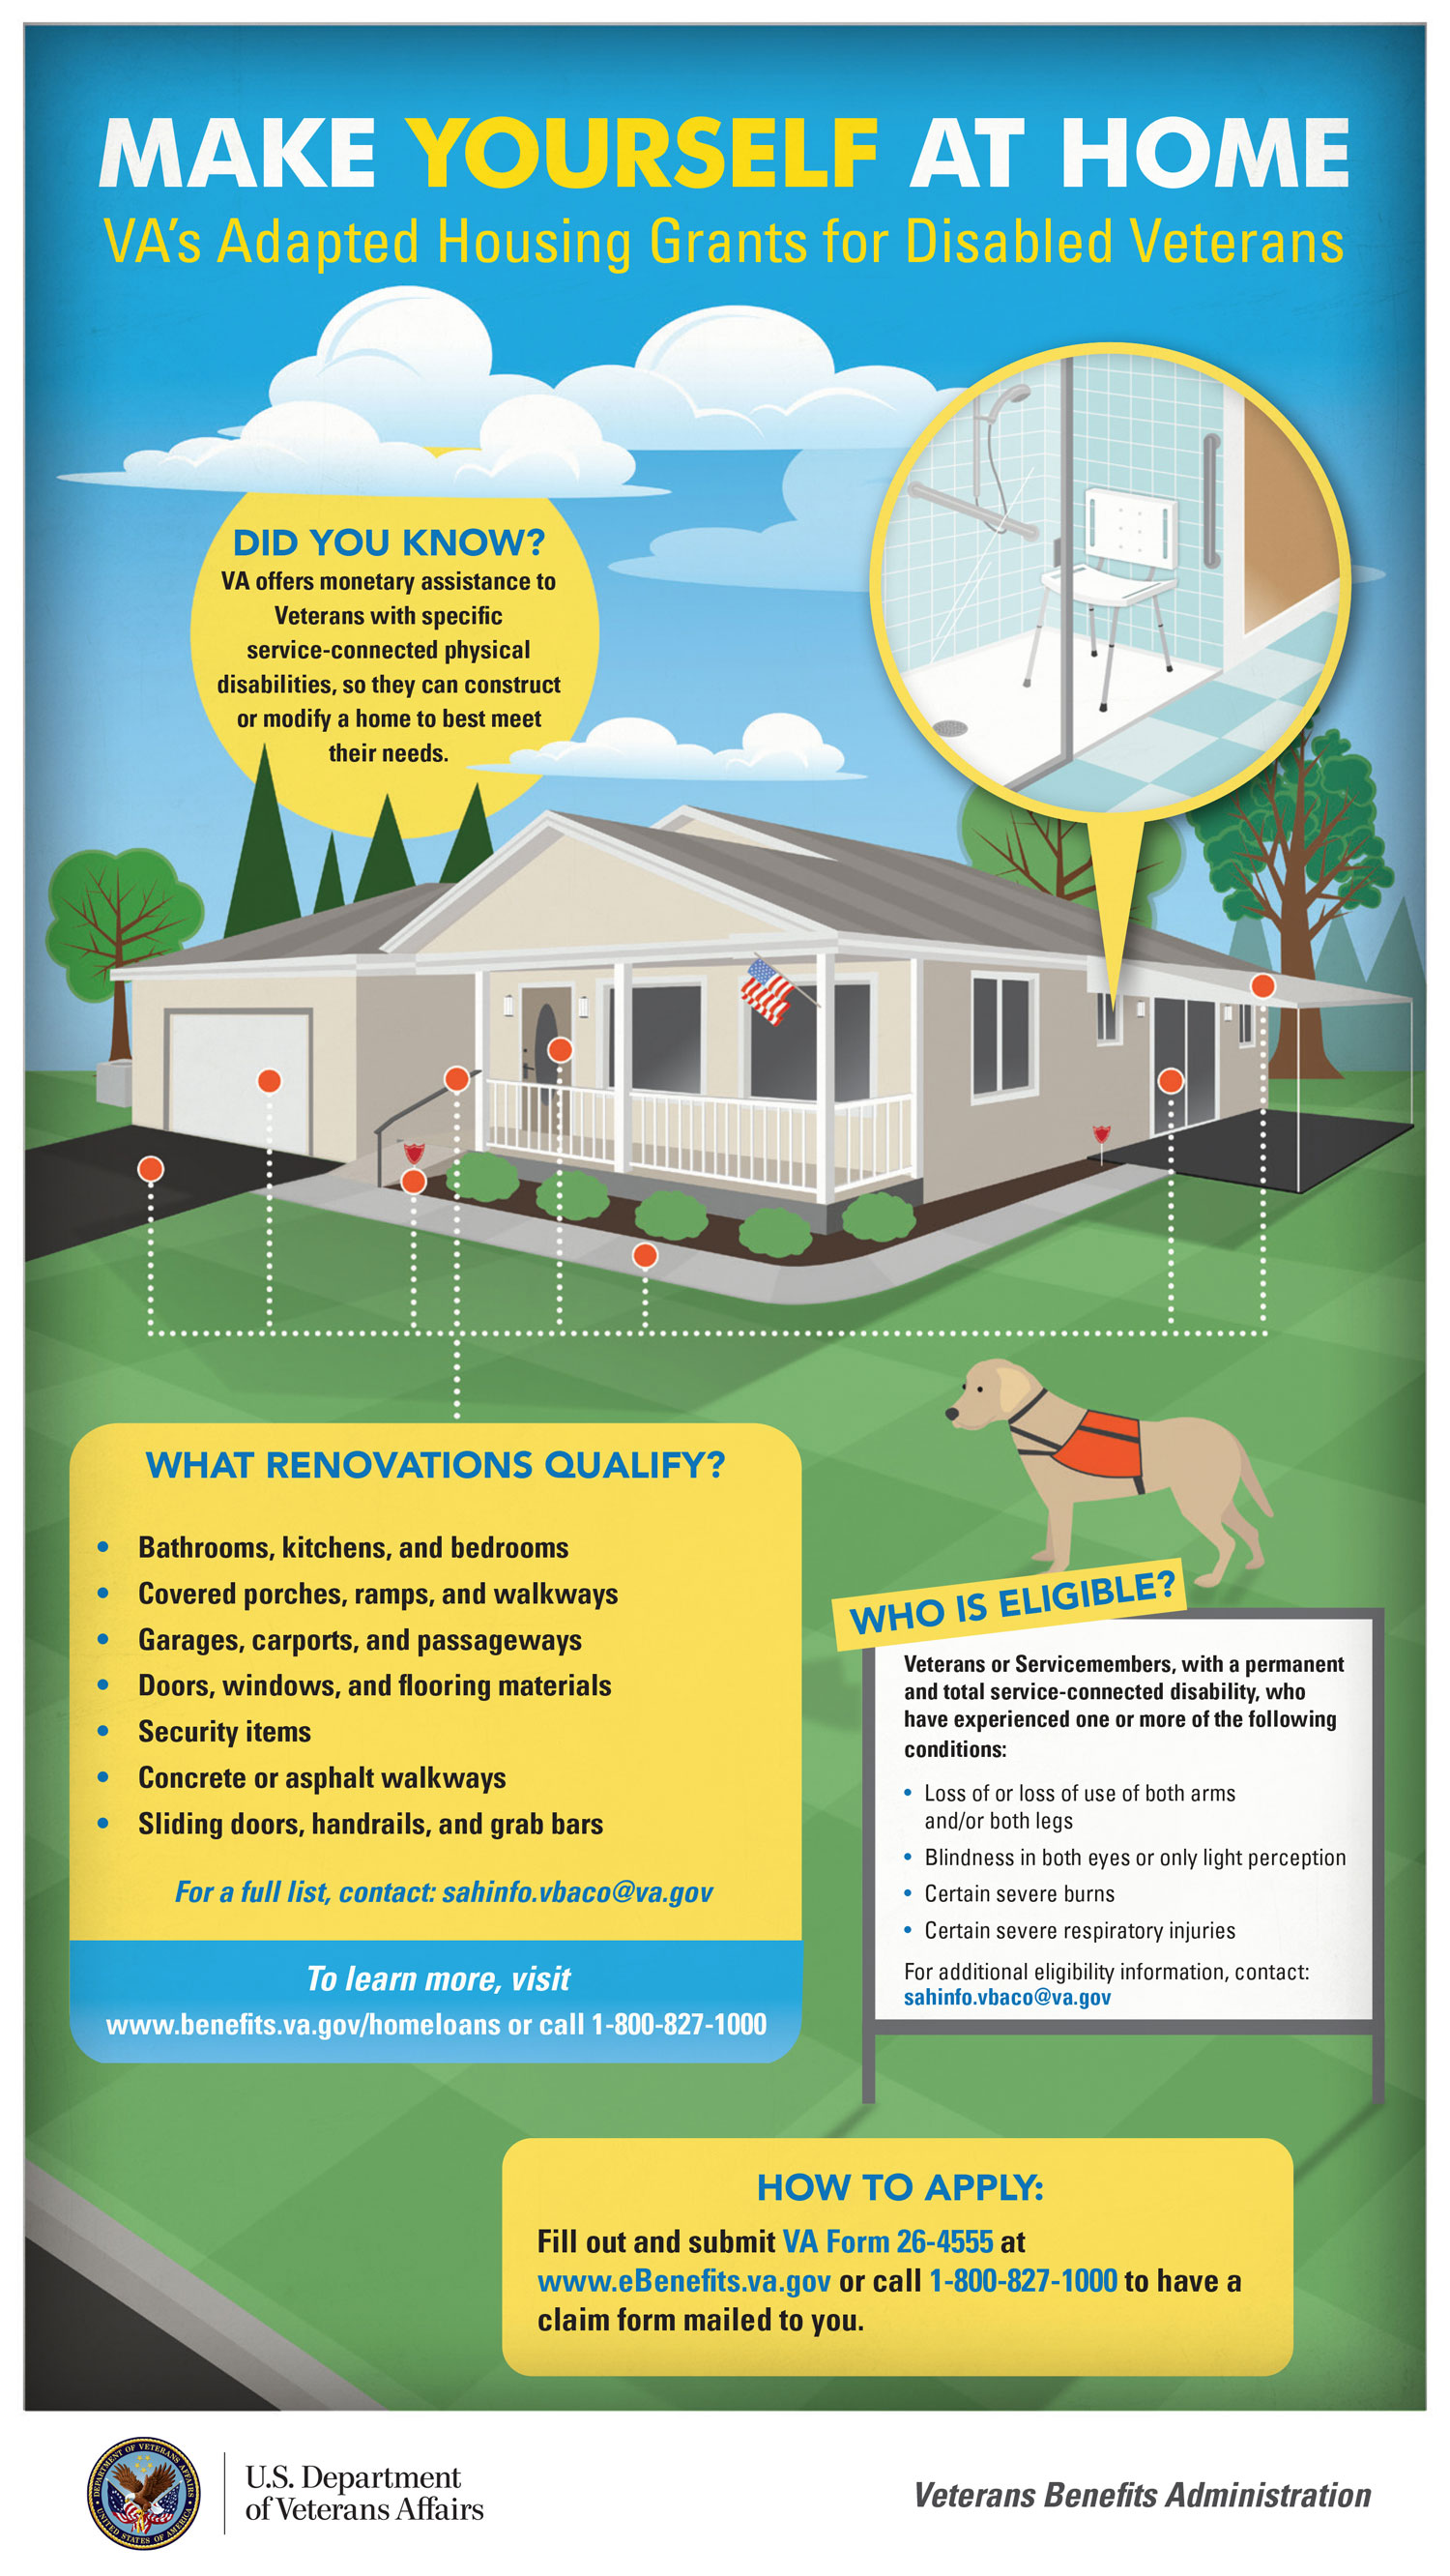 MAKE YOURSELF AT HOME. VA's Adapted Housing Grants for Disabled Veterans. Did you know VA offers monetary assistance to Veterans with specific service-connected physical disabilities, so they can construct or modify a home to best meet their needs? This is infographic details the types of renovations that qualify, the eligibility conditions, and how you can apply by submitting VA Form 26-4555 at www.eBenefits.va.gov or call 1-800-827-1000 to have a claim form mailed for you. Please see PDF Download link to view an accessible PDF that addresses the text content of this document.